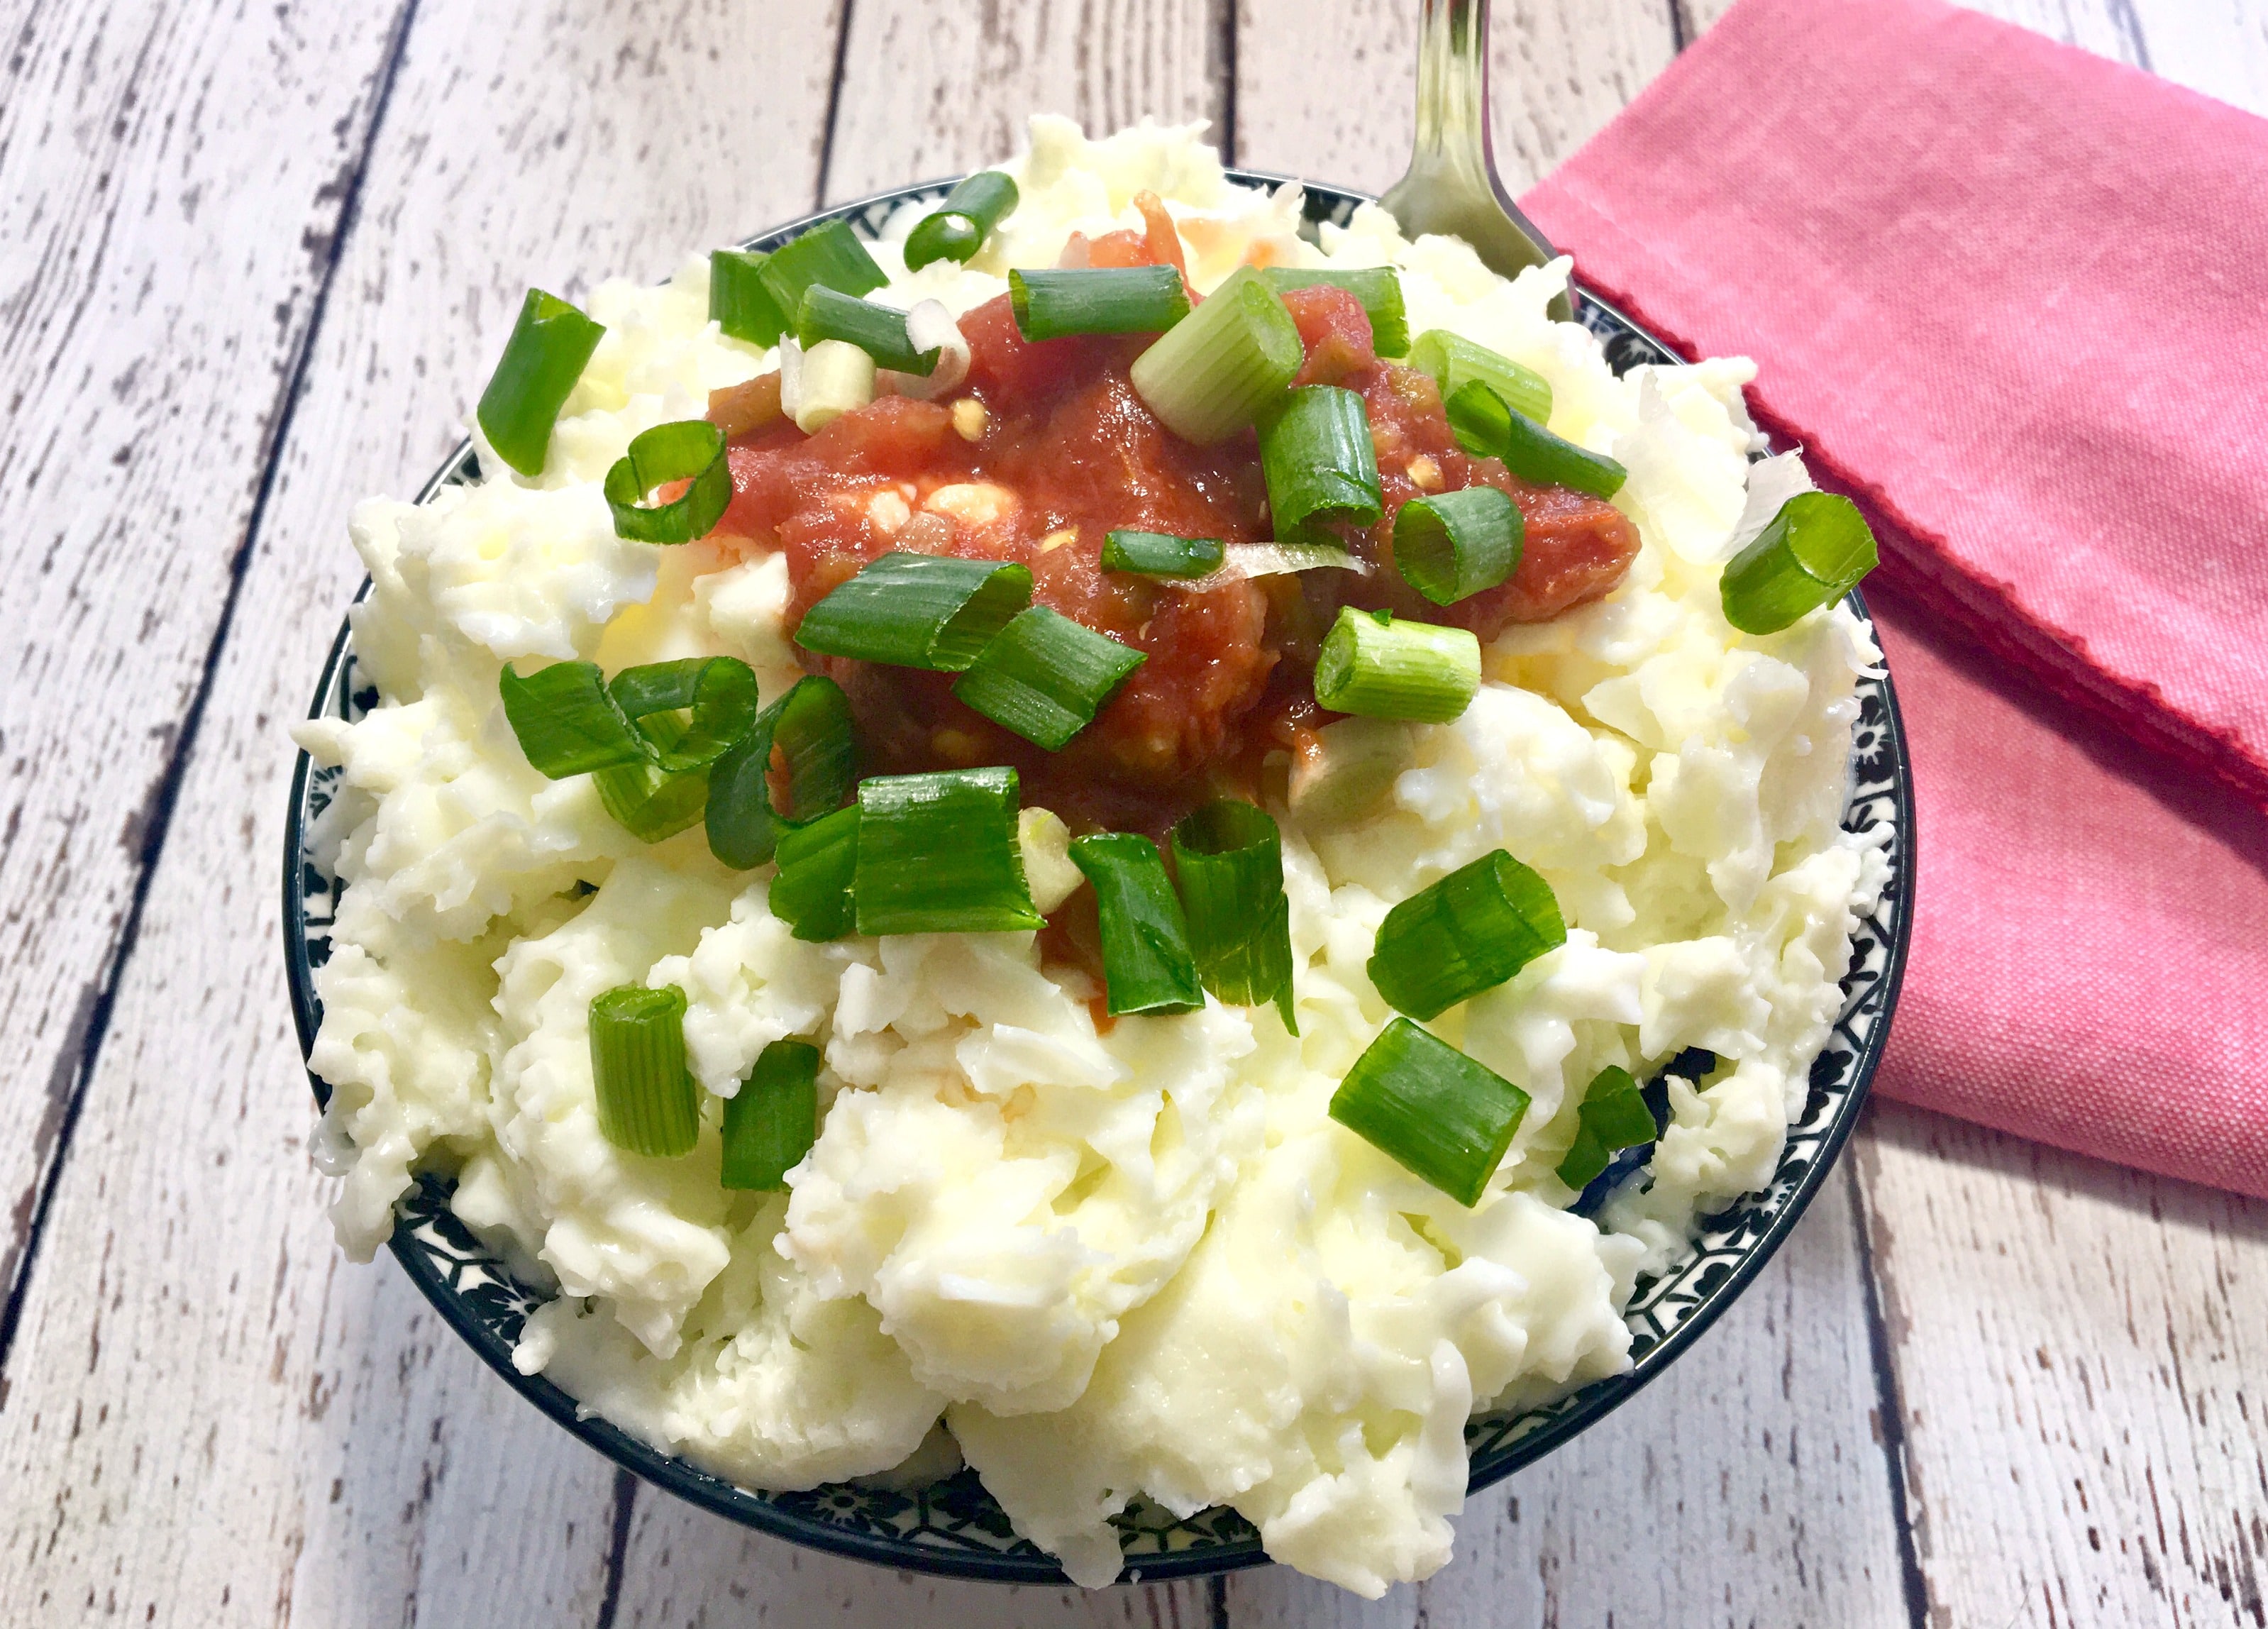 microwaved egg whites with salsa and green onion in bowl with red napkin on the side